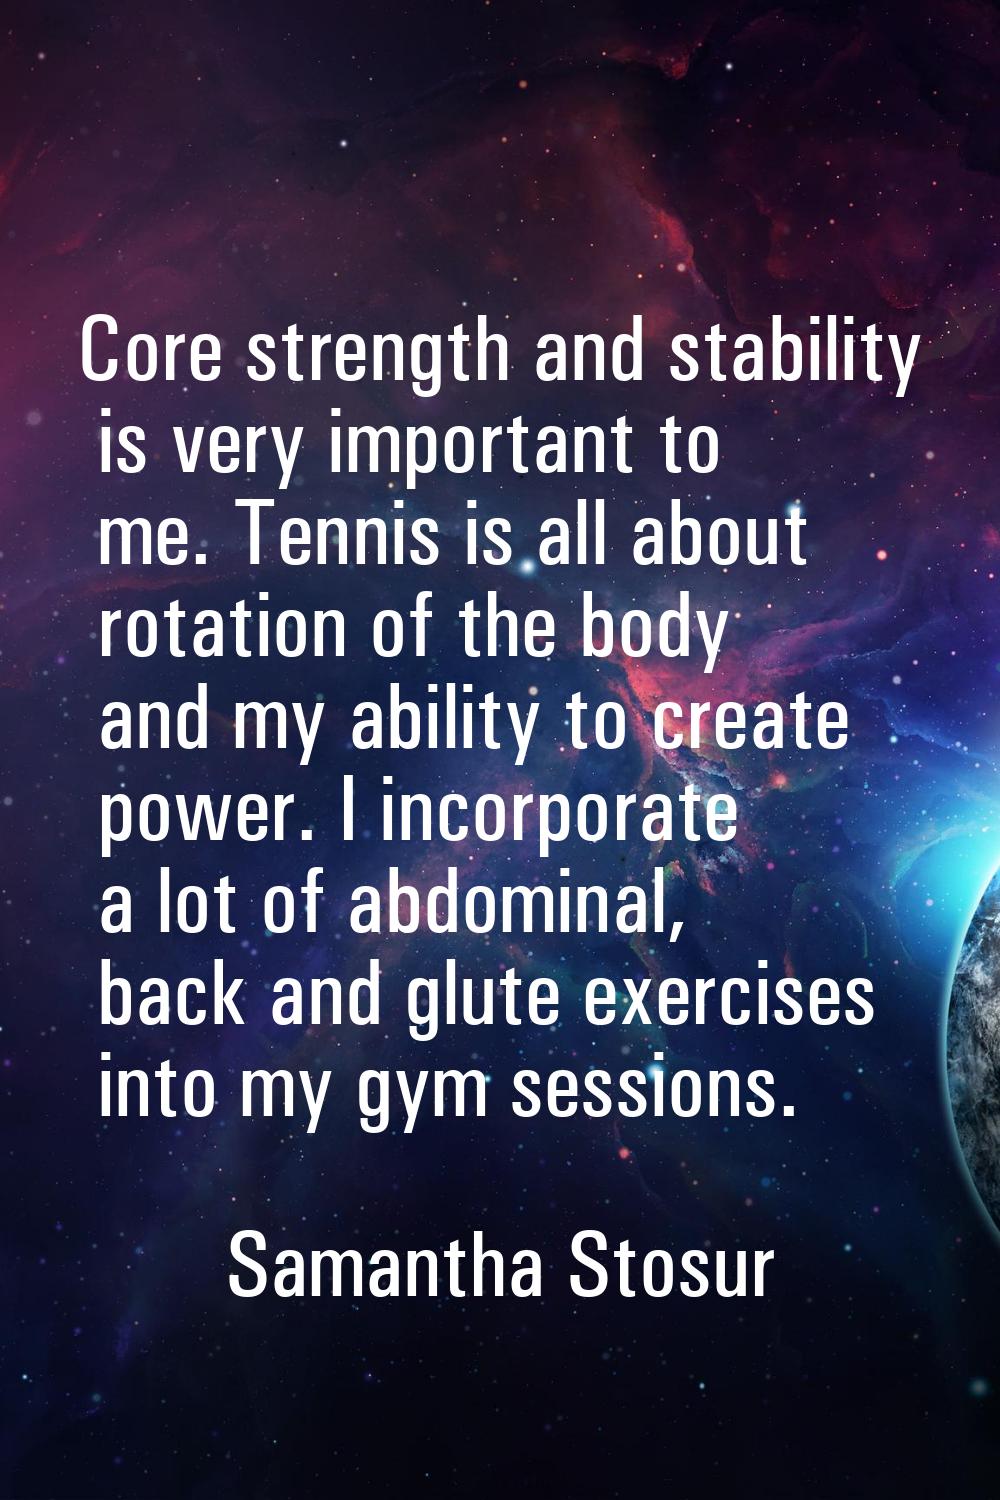 Core strength and stability is very important to me. Tennis is all about rotation of the body and m